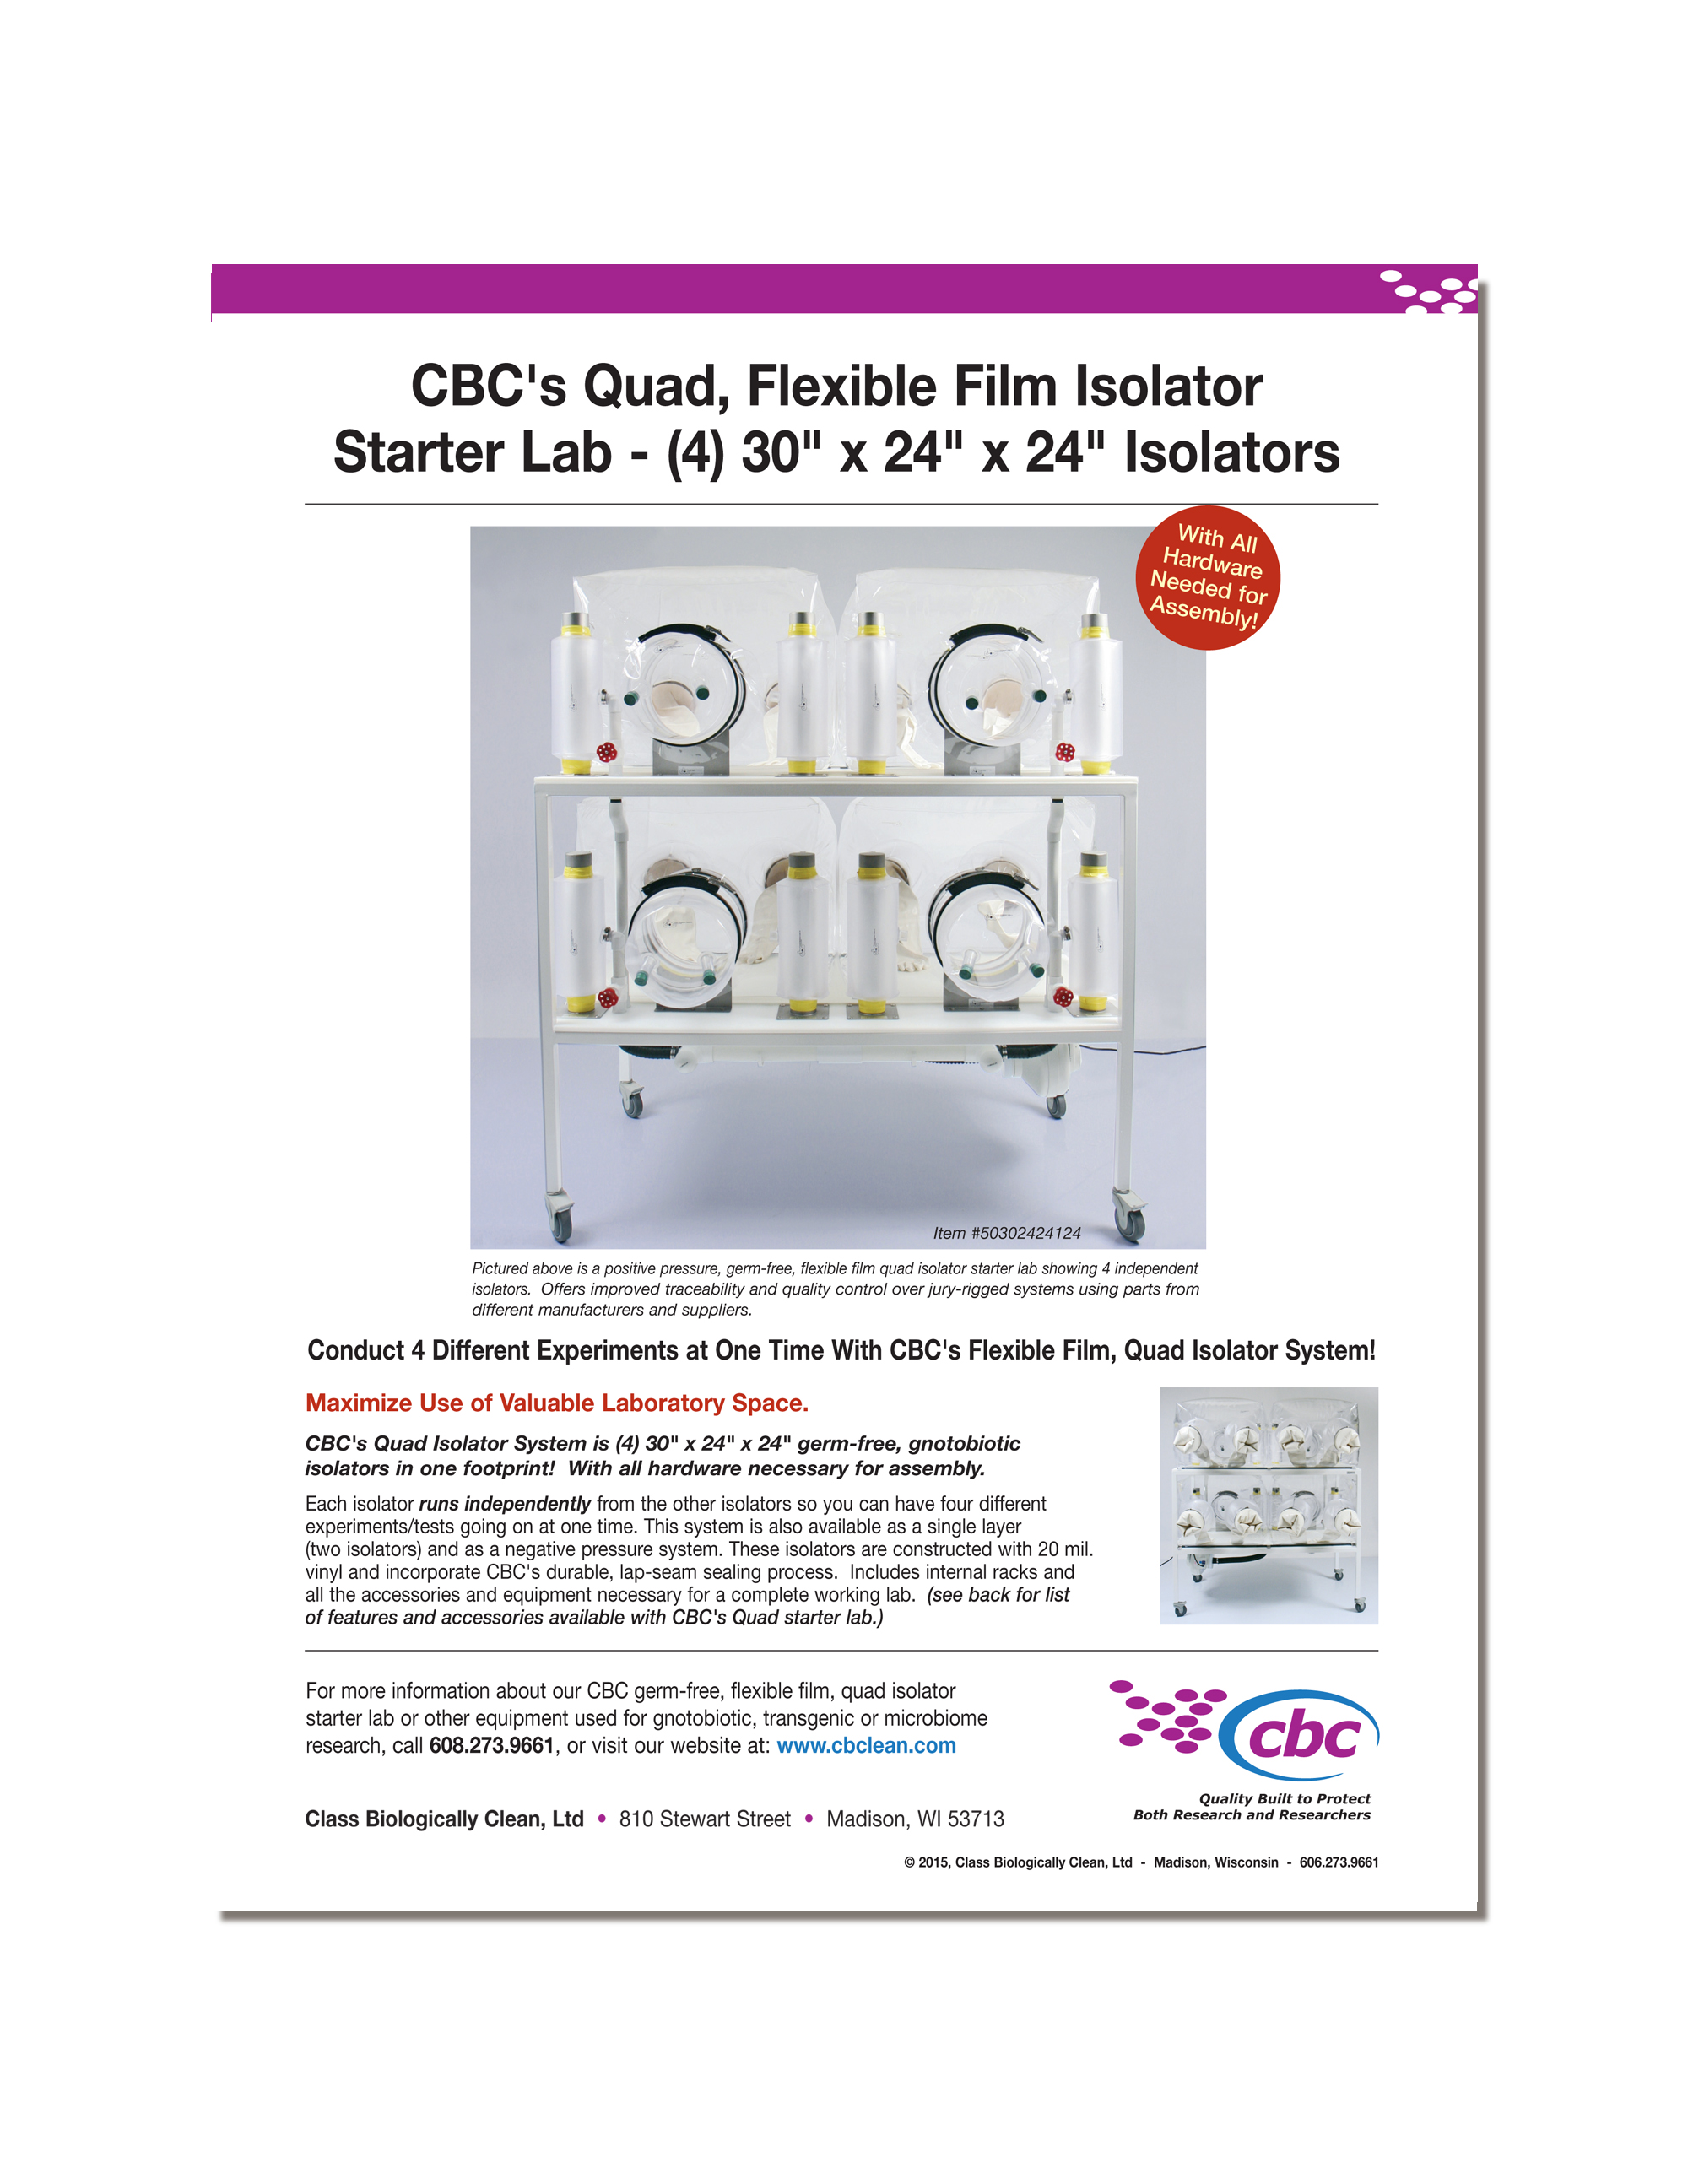 The CBC Quad isolator maximizes lab space and allows researchers to conduct four different experiments with germ-free, gnotobiotic mice or other rodents at one time. Click here to download flyer.